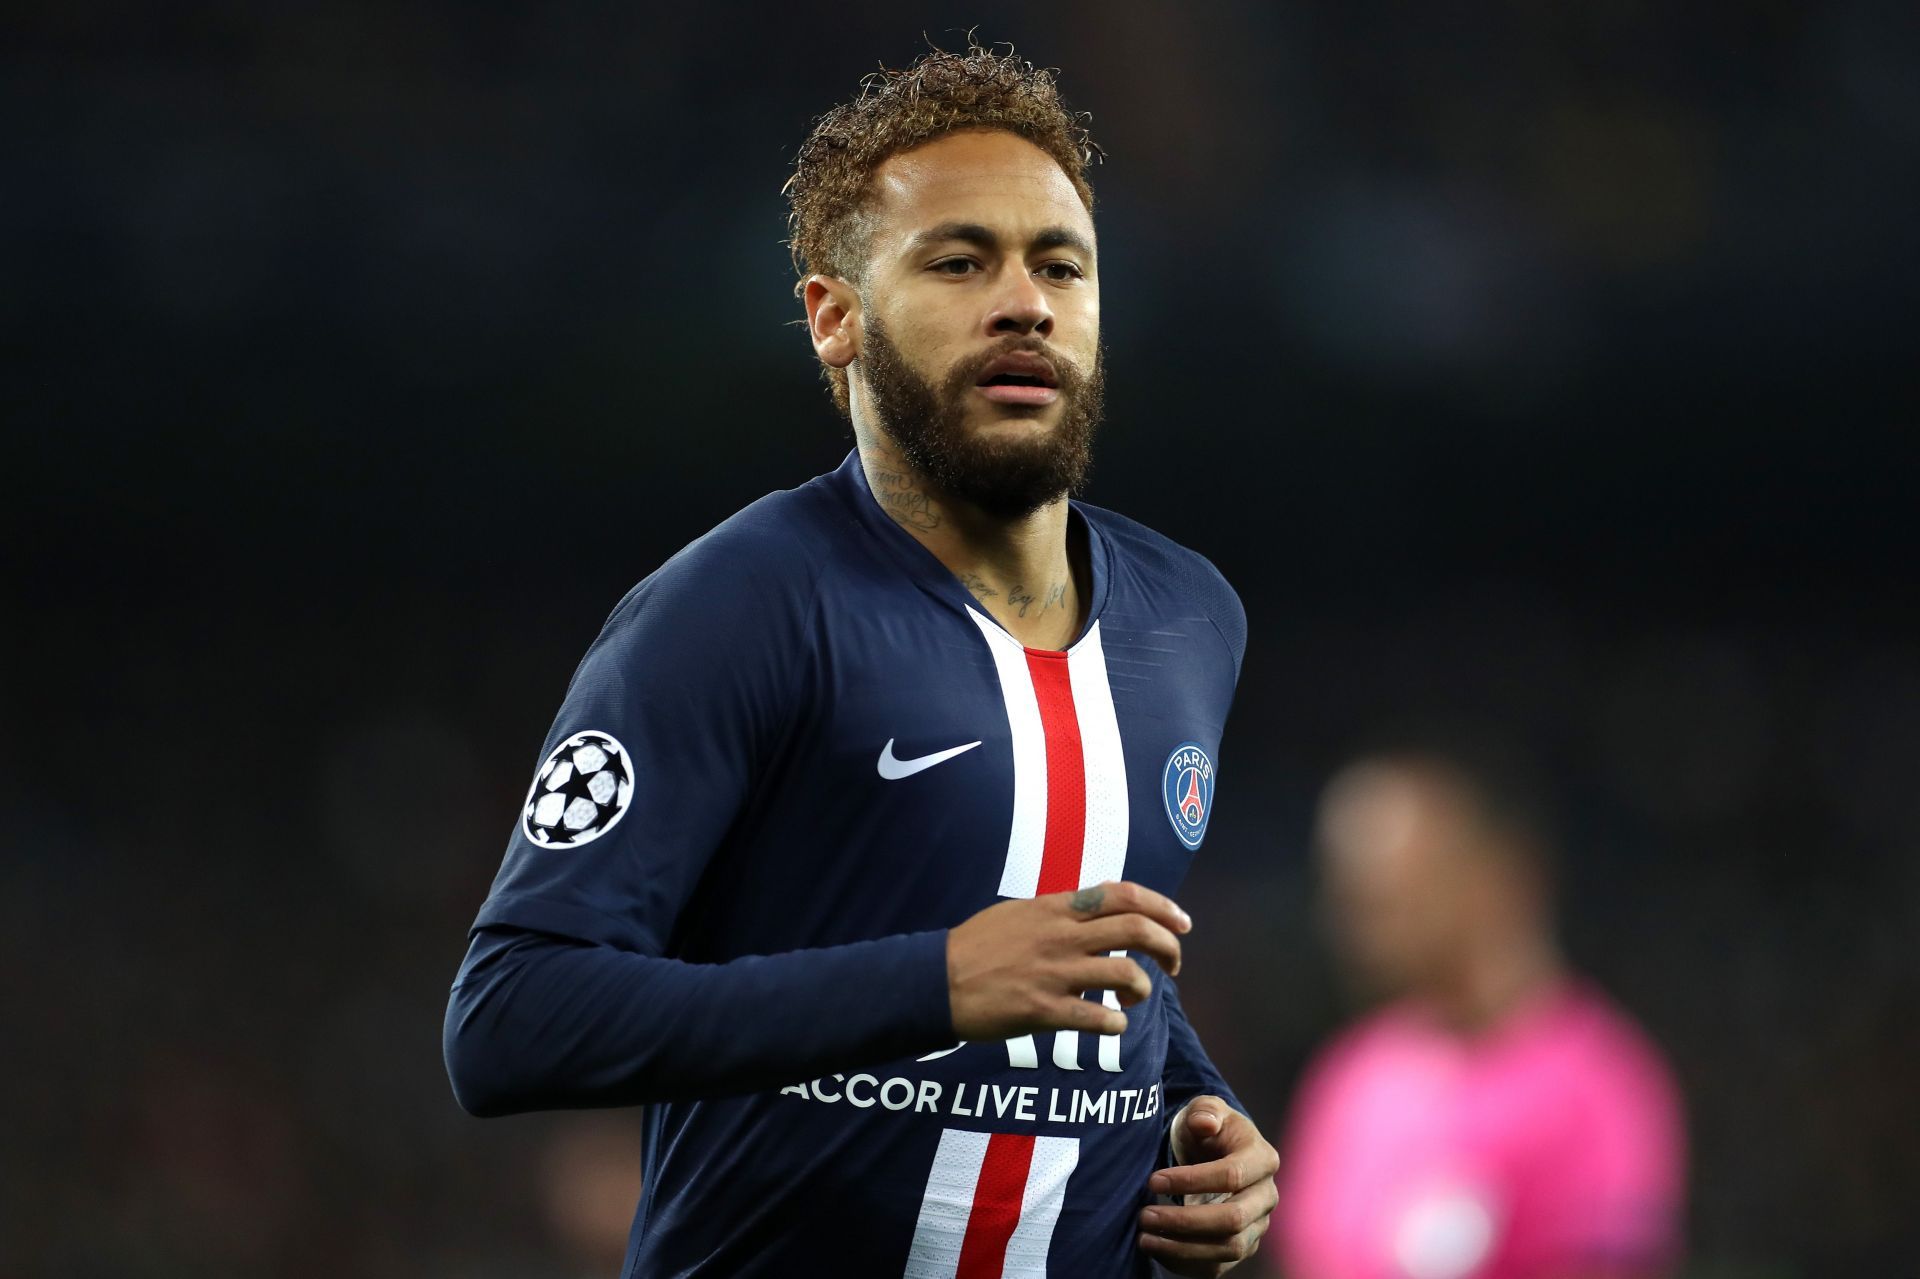 The attacker has bagged 92 goals and 57 assists for PSG so far